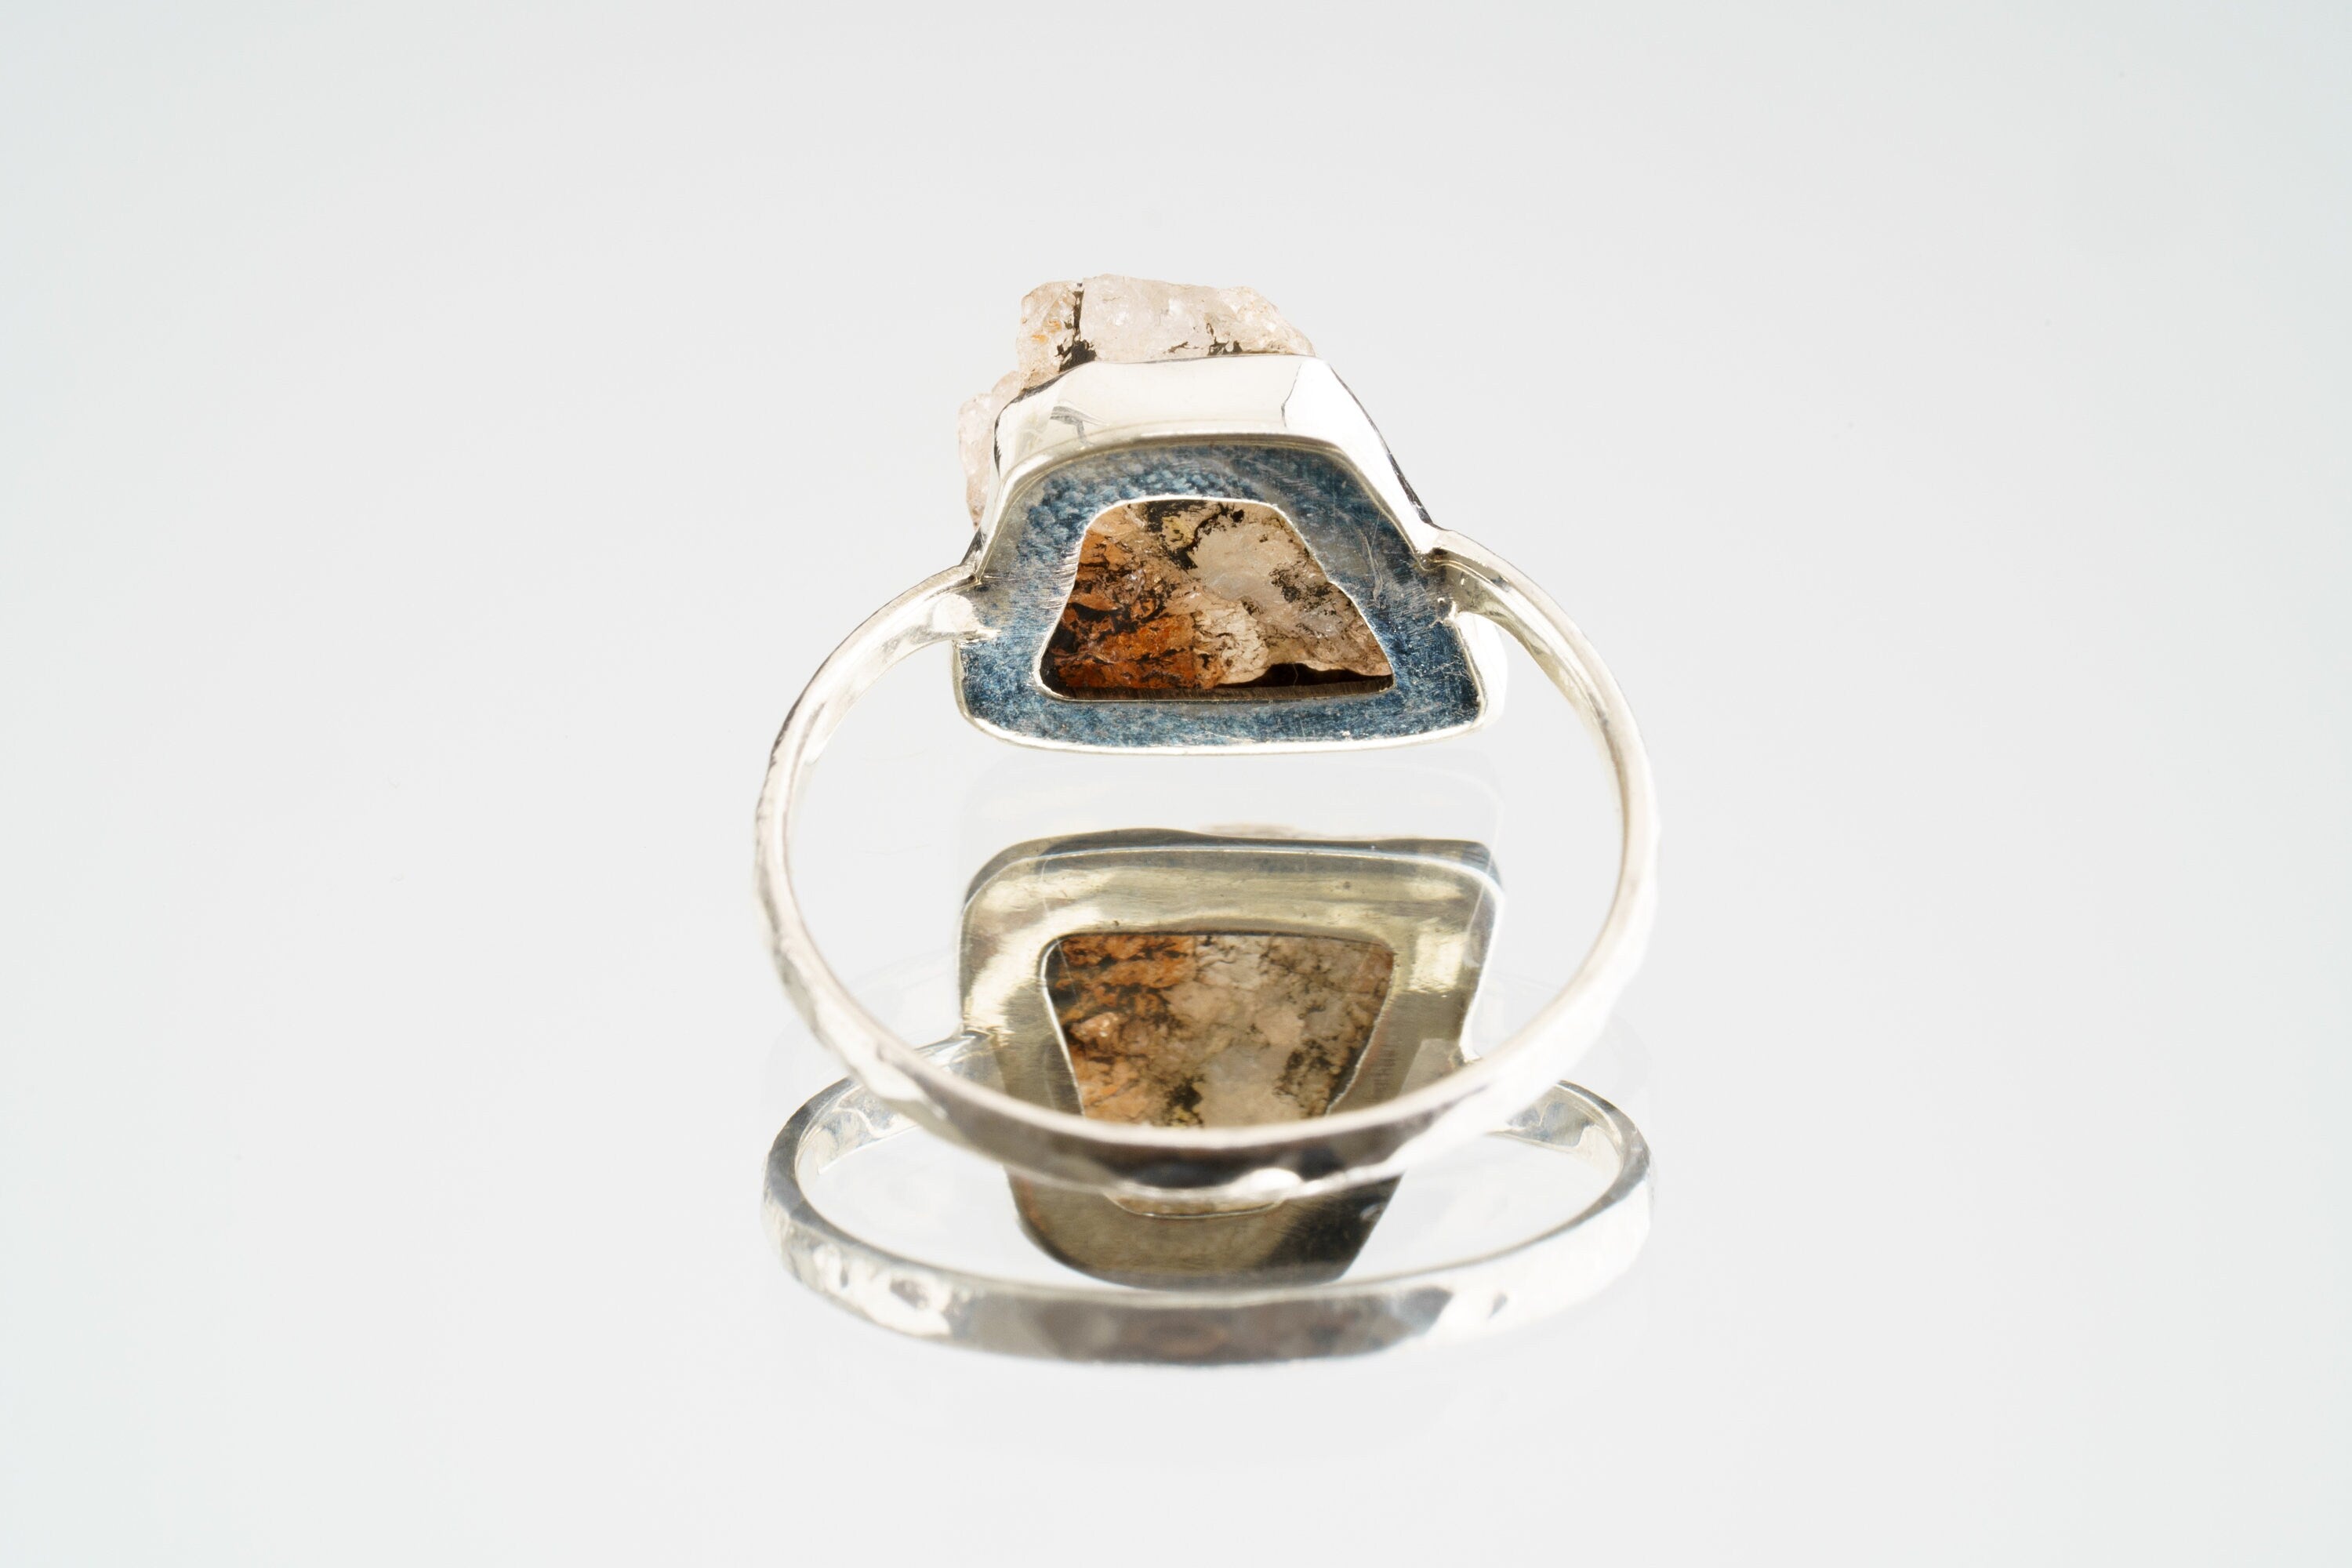 Natural Rough Sunstone - Stack Crystal Ring - Size 7 1/4 US - 925 Sterling Silver - Thin Band Hammer Textured